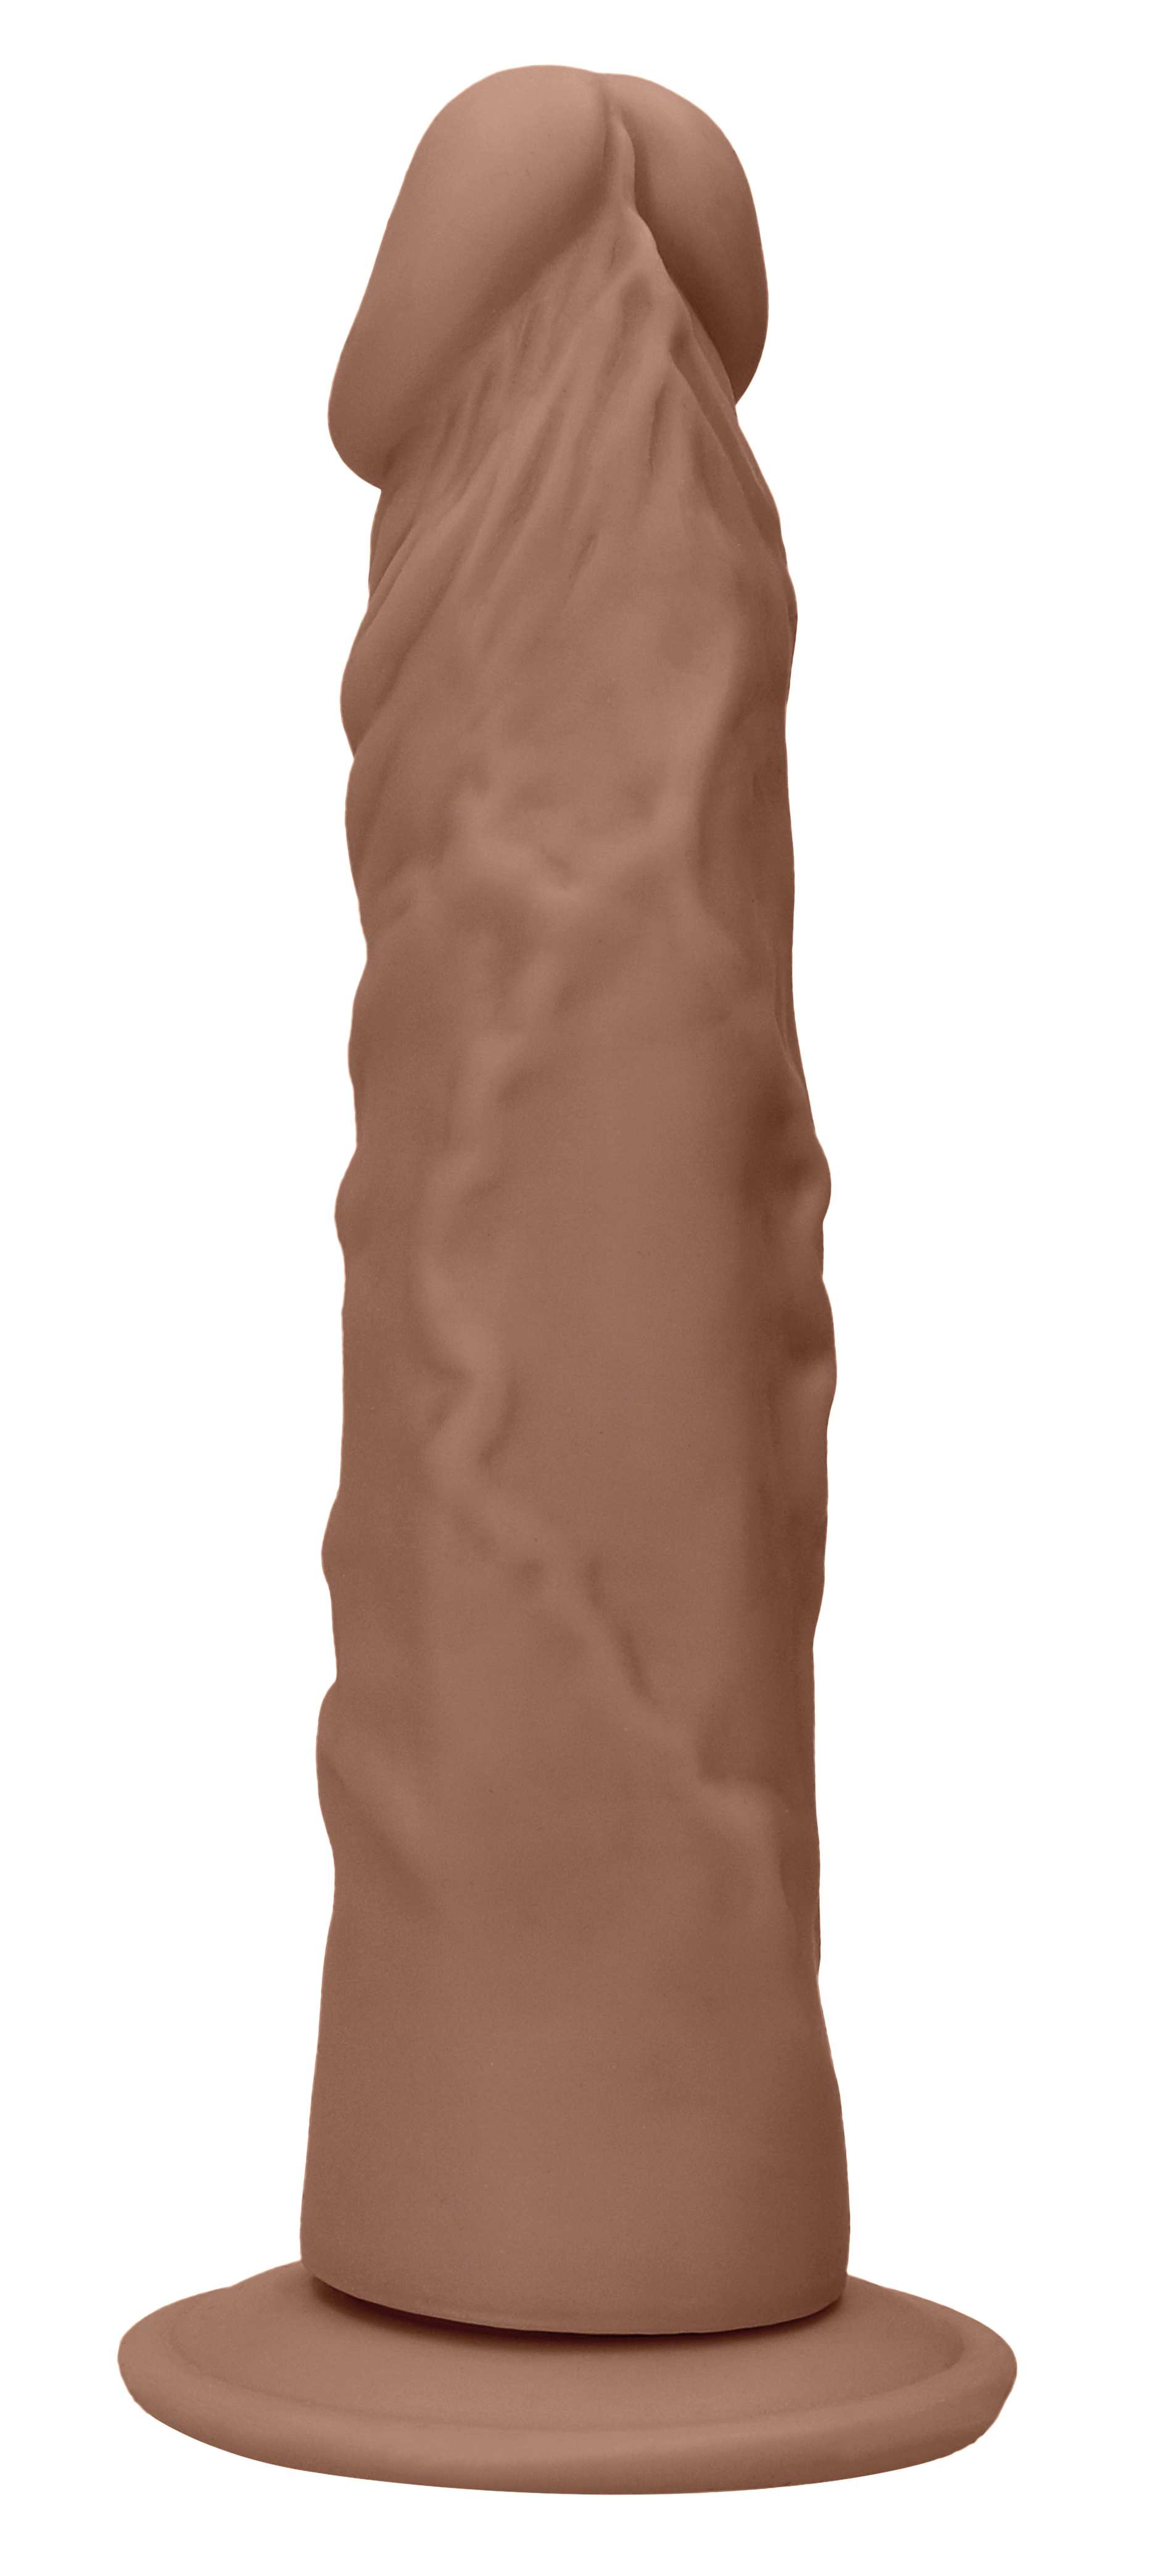 inch dong without testicles tan 